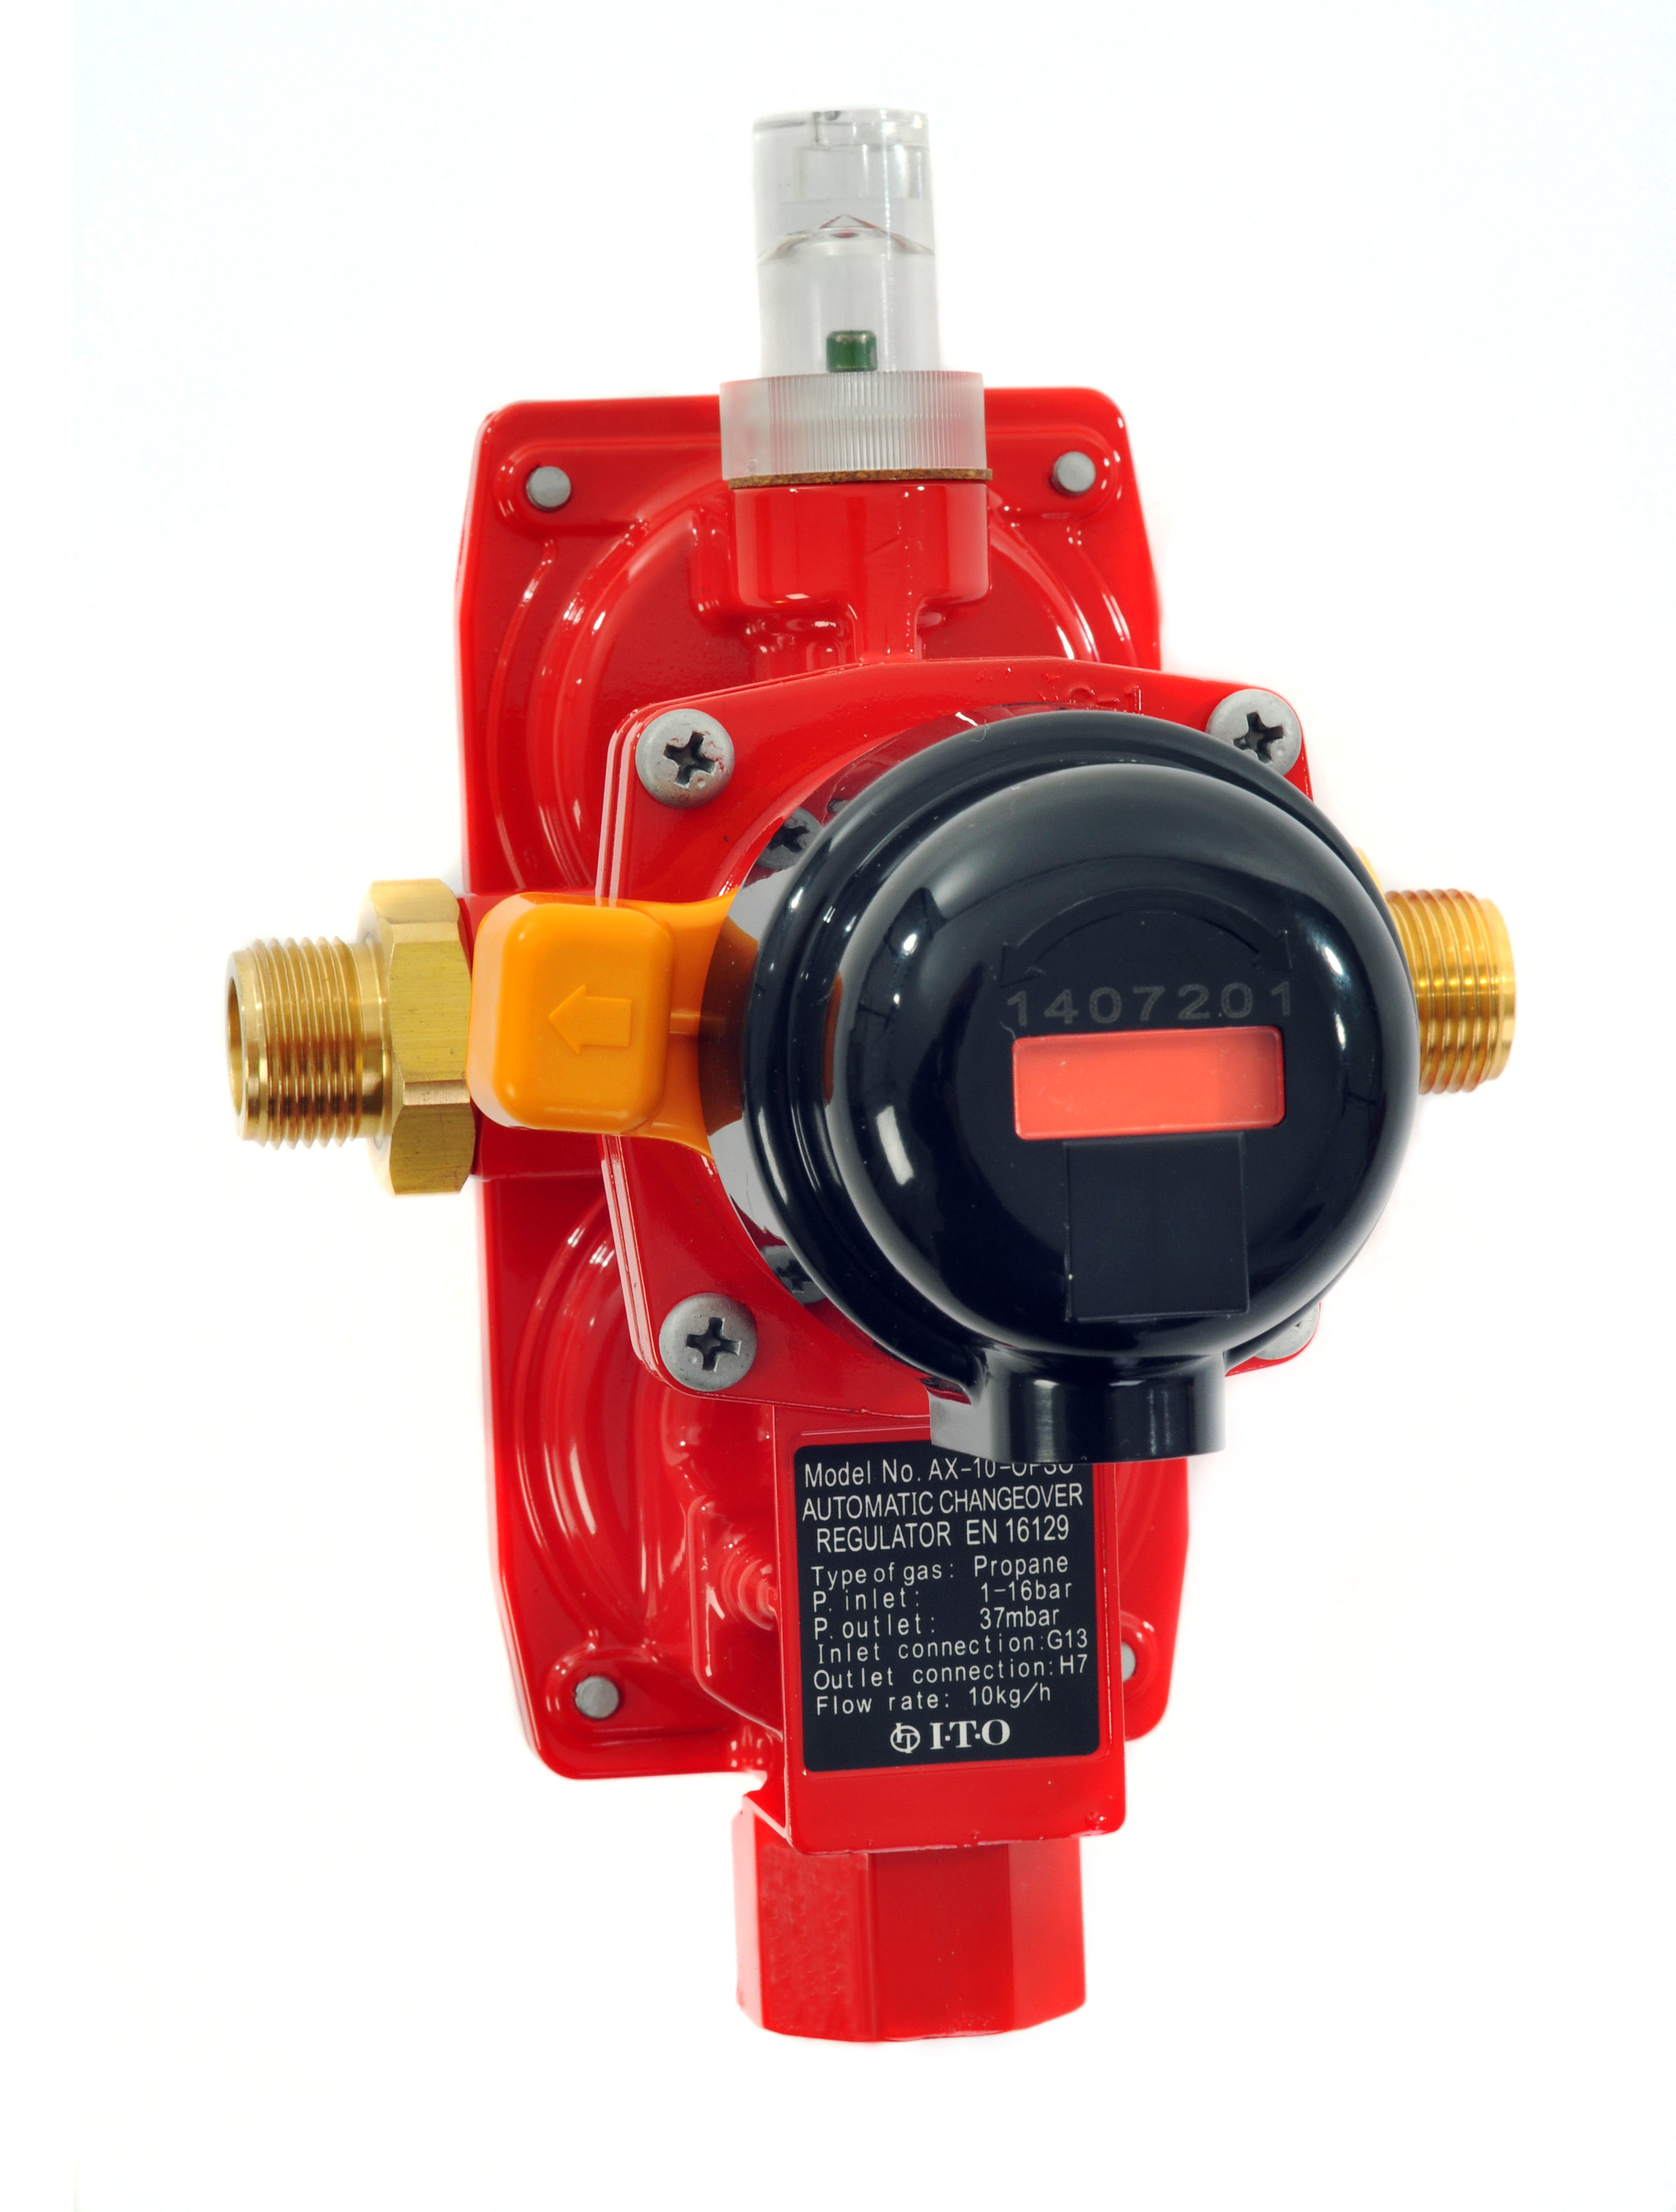 ITO Automatic Changeover with OPSO Gas Regulator Kit POL 